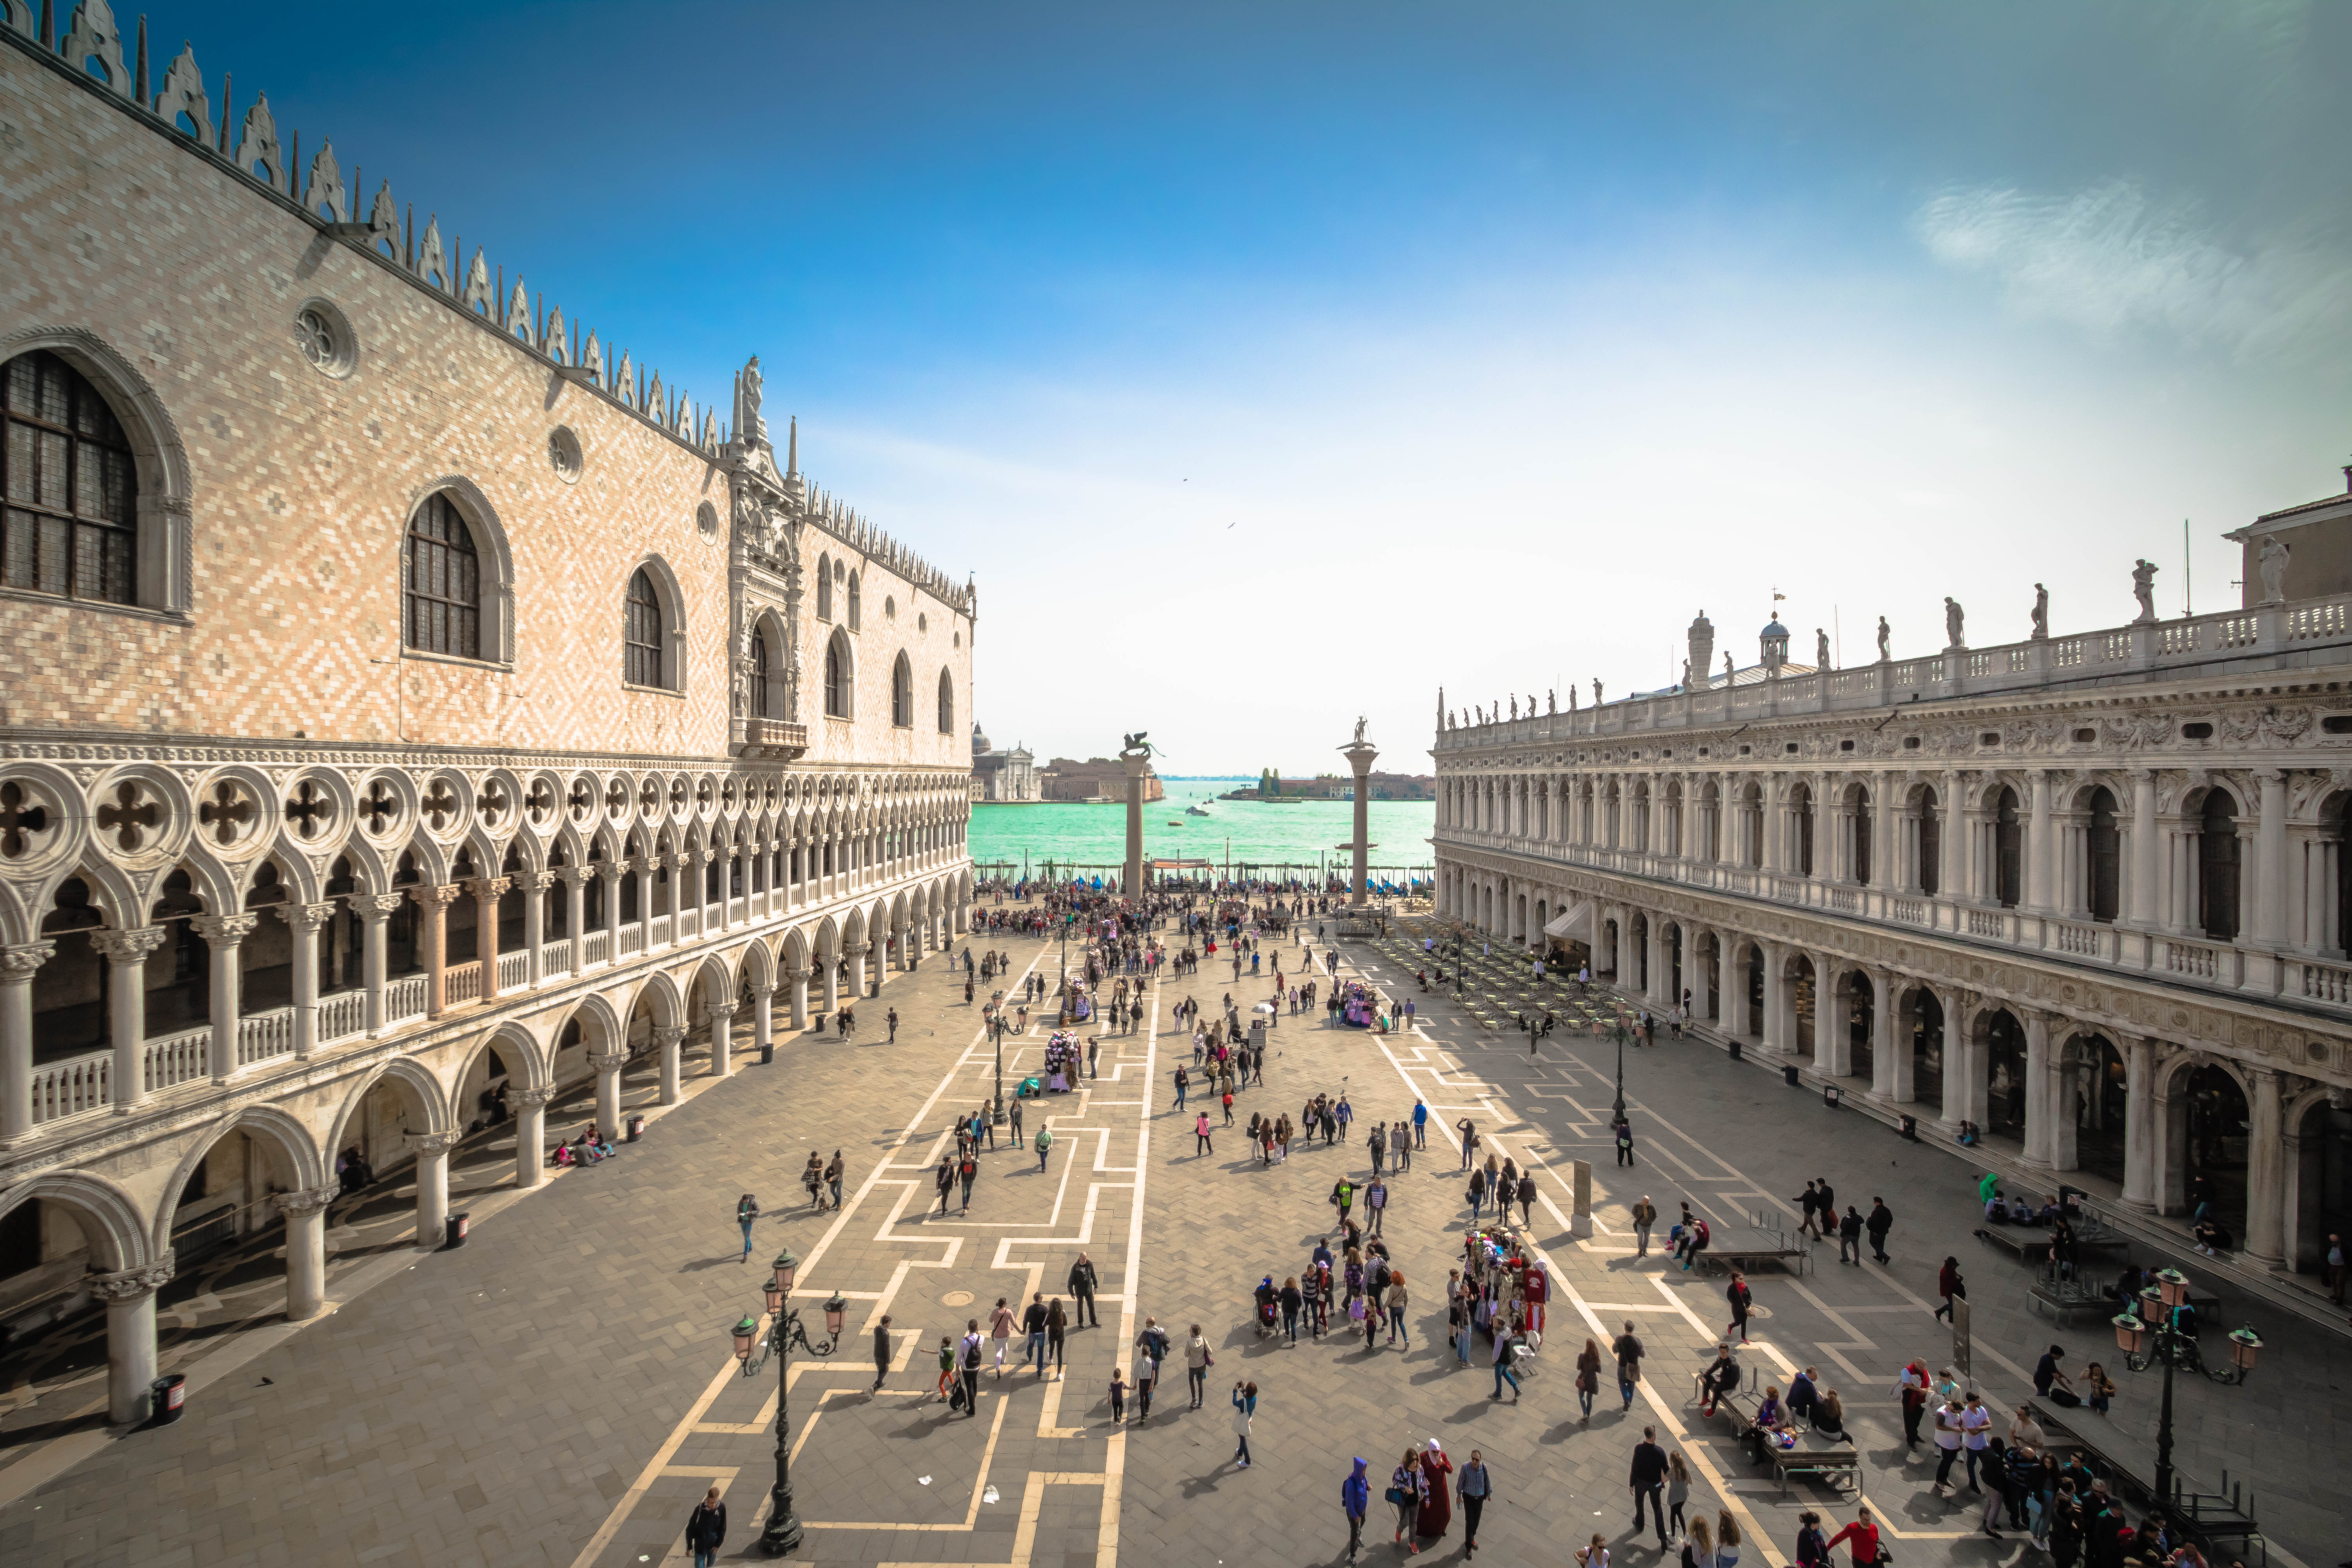 View of Piazza St. Marco from the rooftop of the basilica.